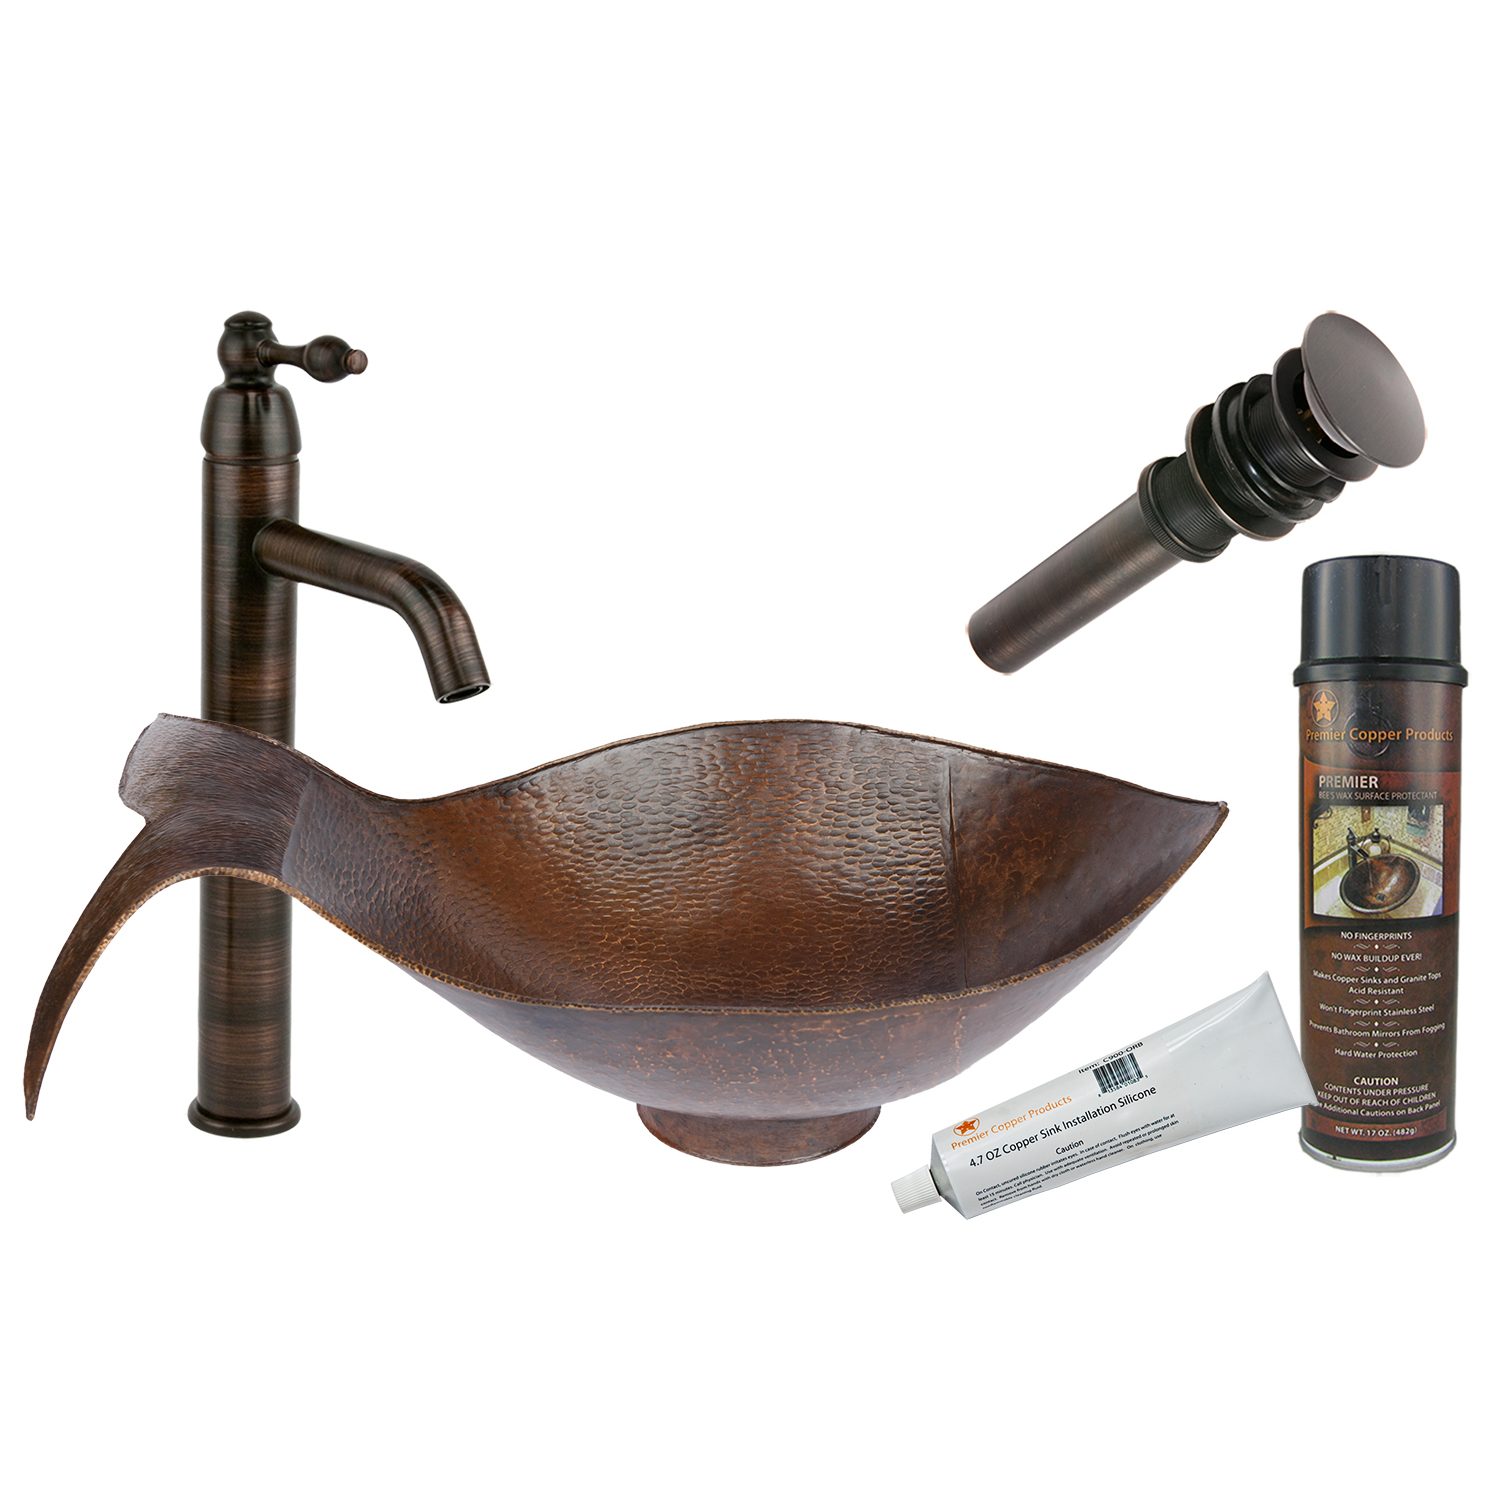 Fish Vessel Hammered Copper Sink, Faucet And Accessories Package, Oil Rubbed Bronze